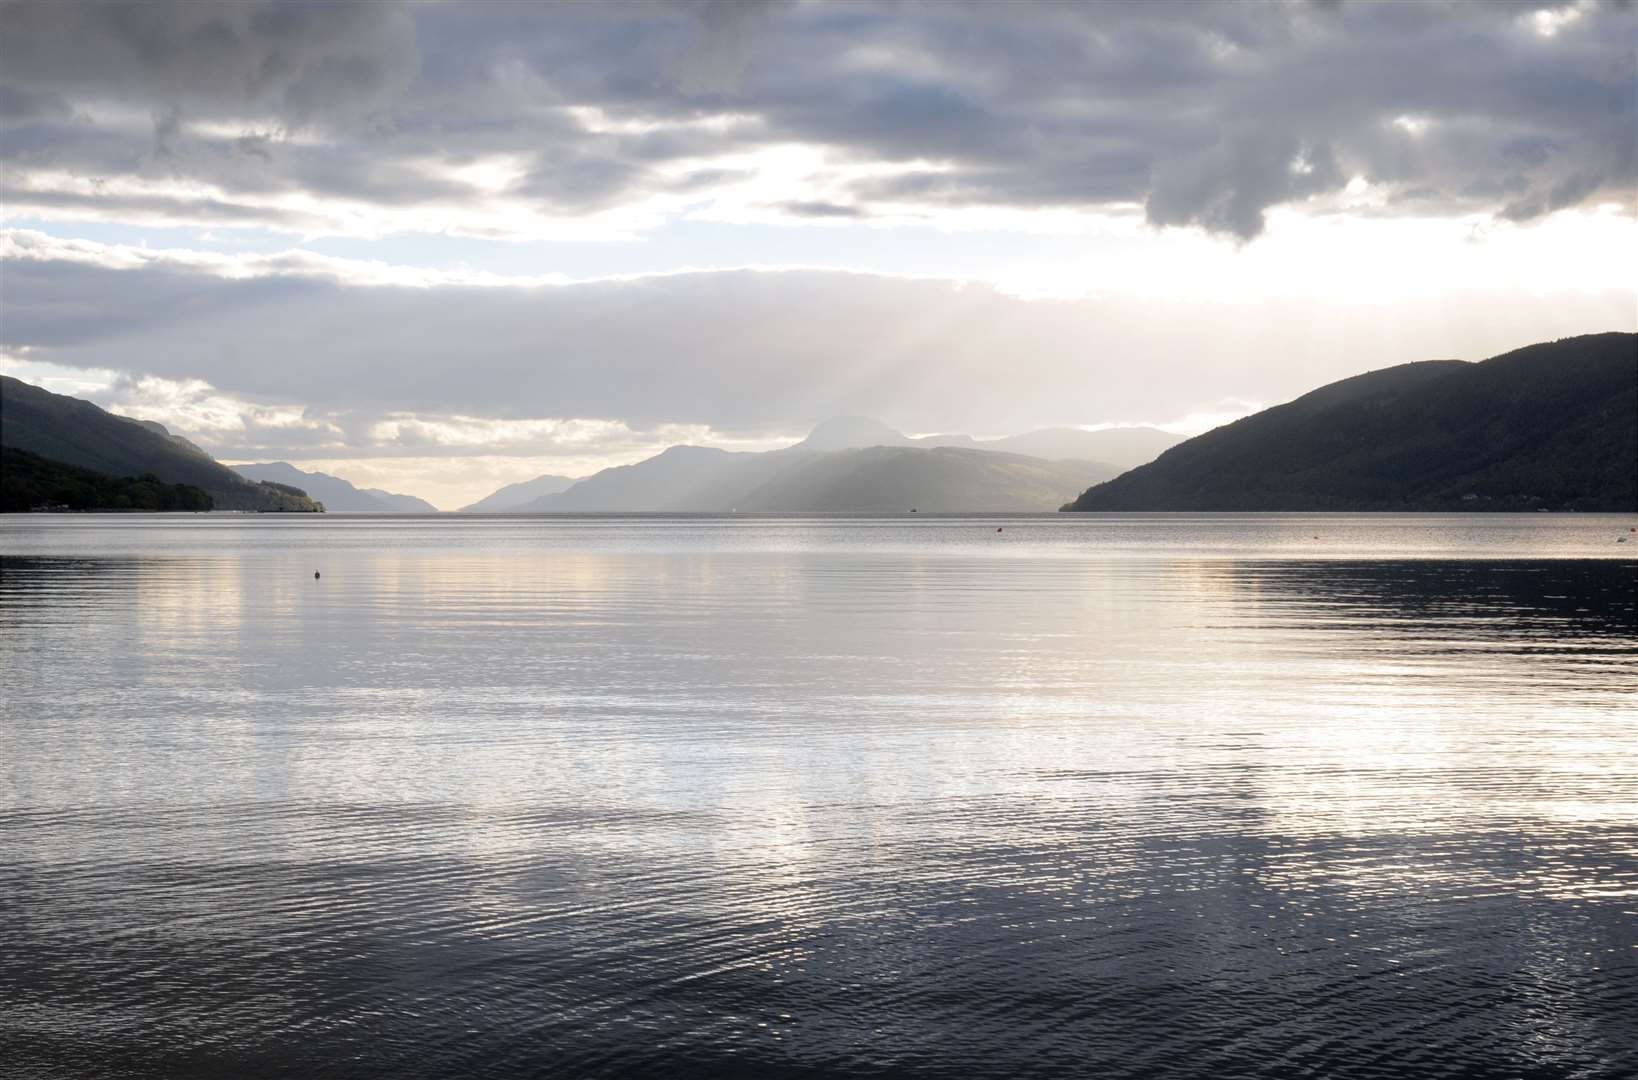 There have now been 16 "official" sightings of the monster at Loch Ness this year.